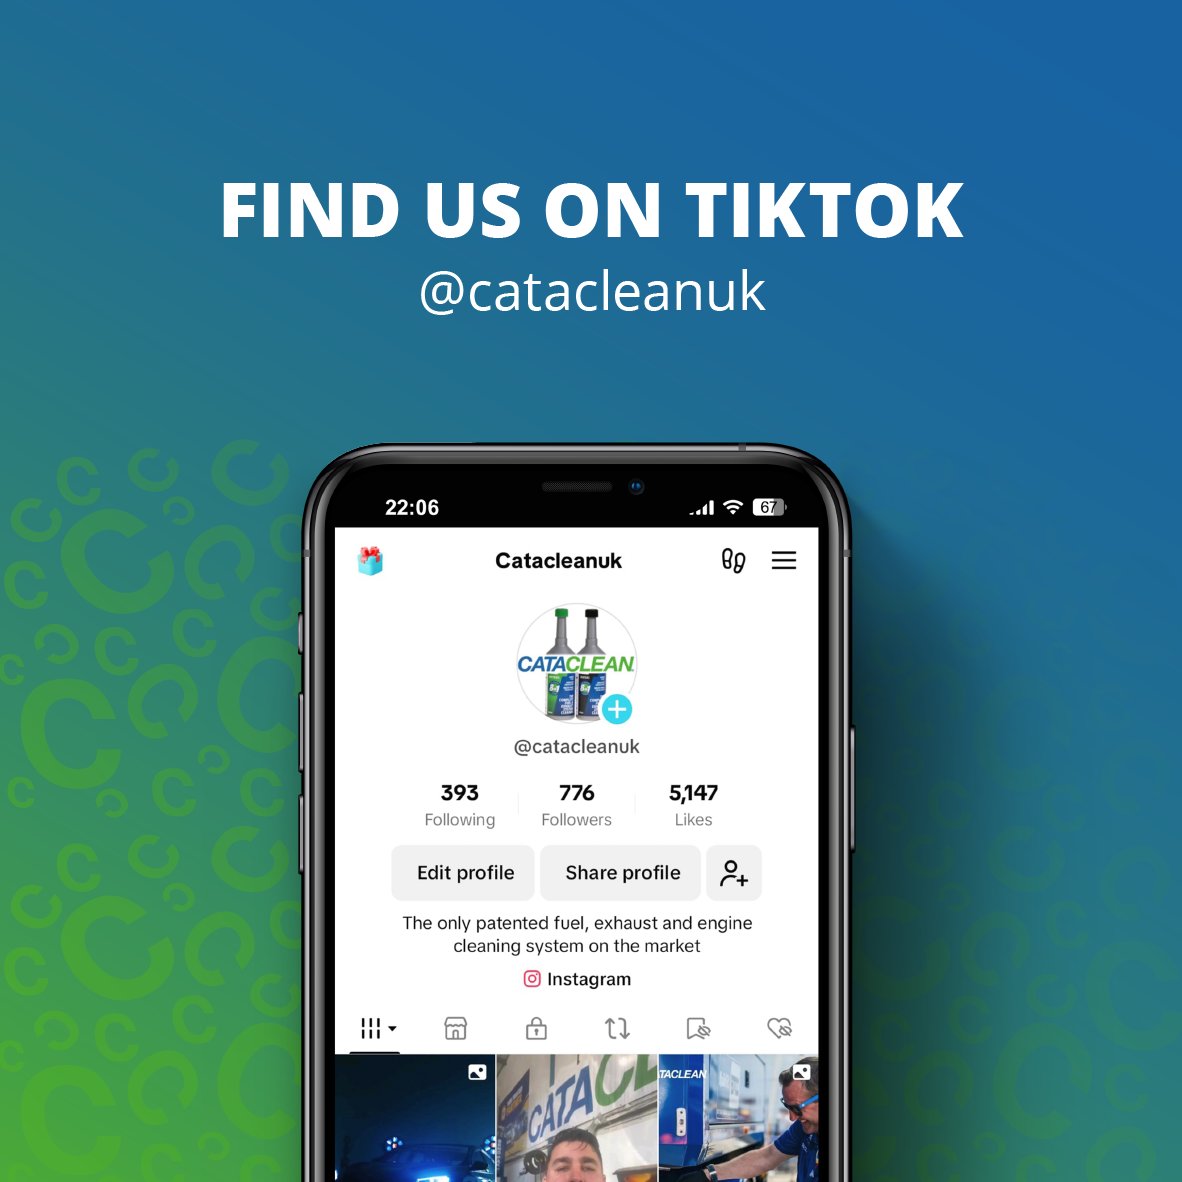 Don’t forget to follow us on TikTok! @catacleanuk 📱🎥 #tiktok #video #Cataclean #videos #reel #Cataclean #EngineCleaning #FuelAdditive #emissions #performance #enginesystem #catalyticconverter